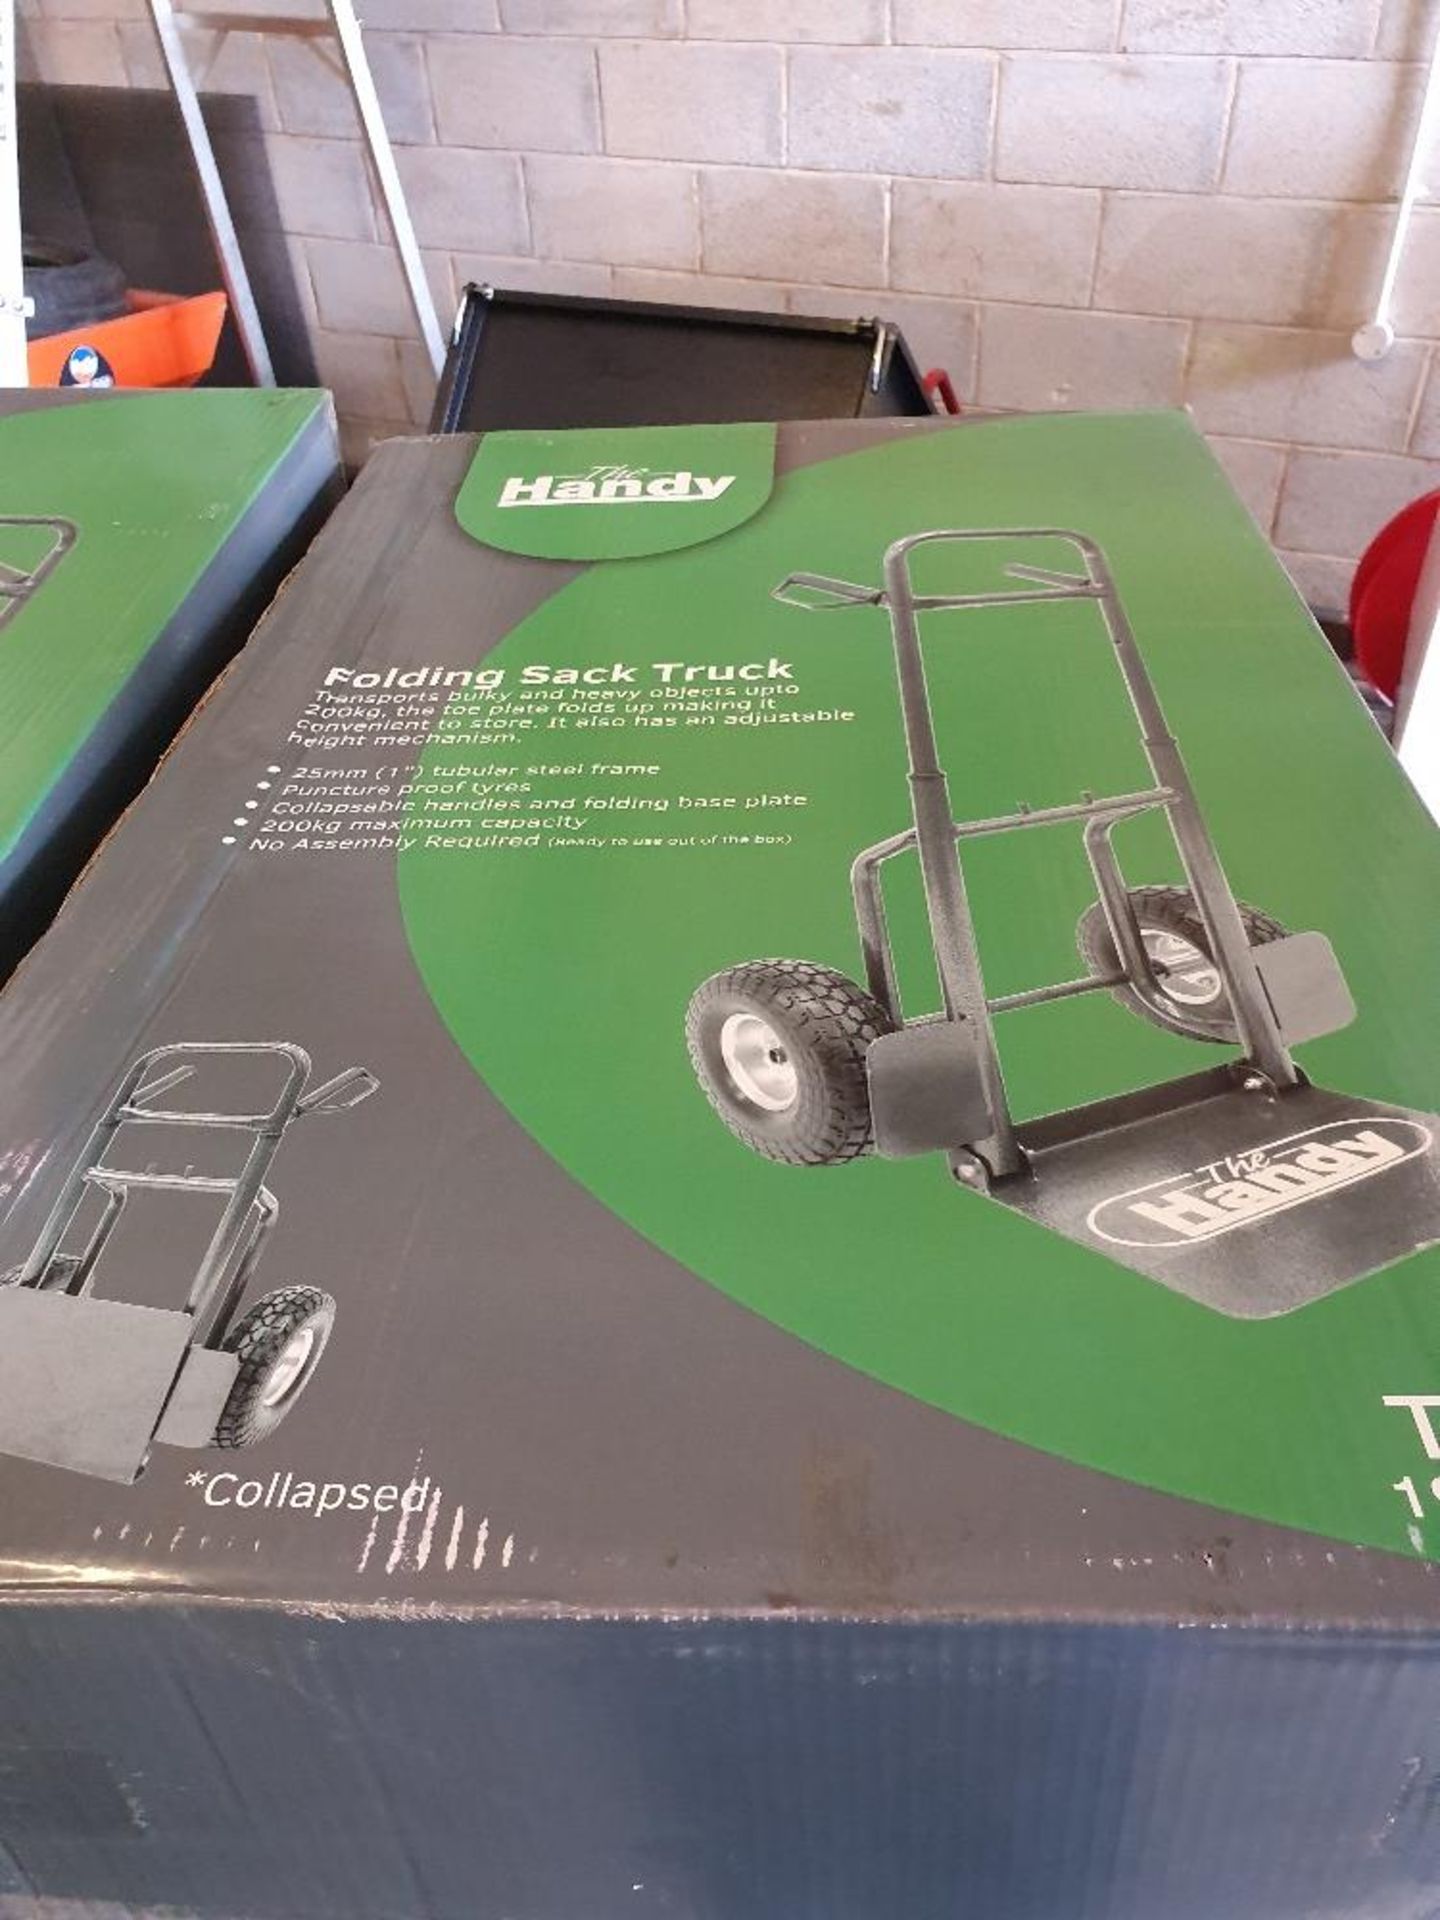 The Handy folding sack truck (£5.00 loading charge)